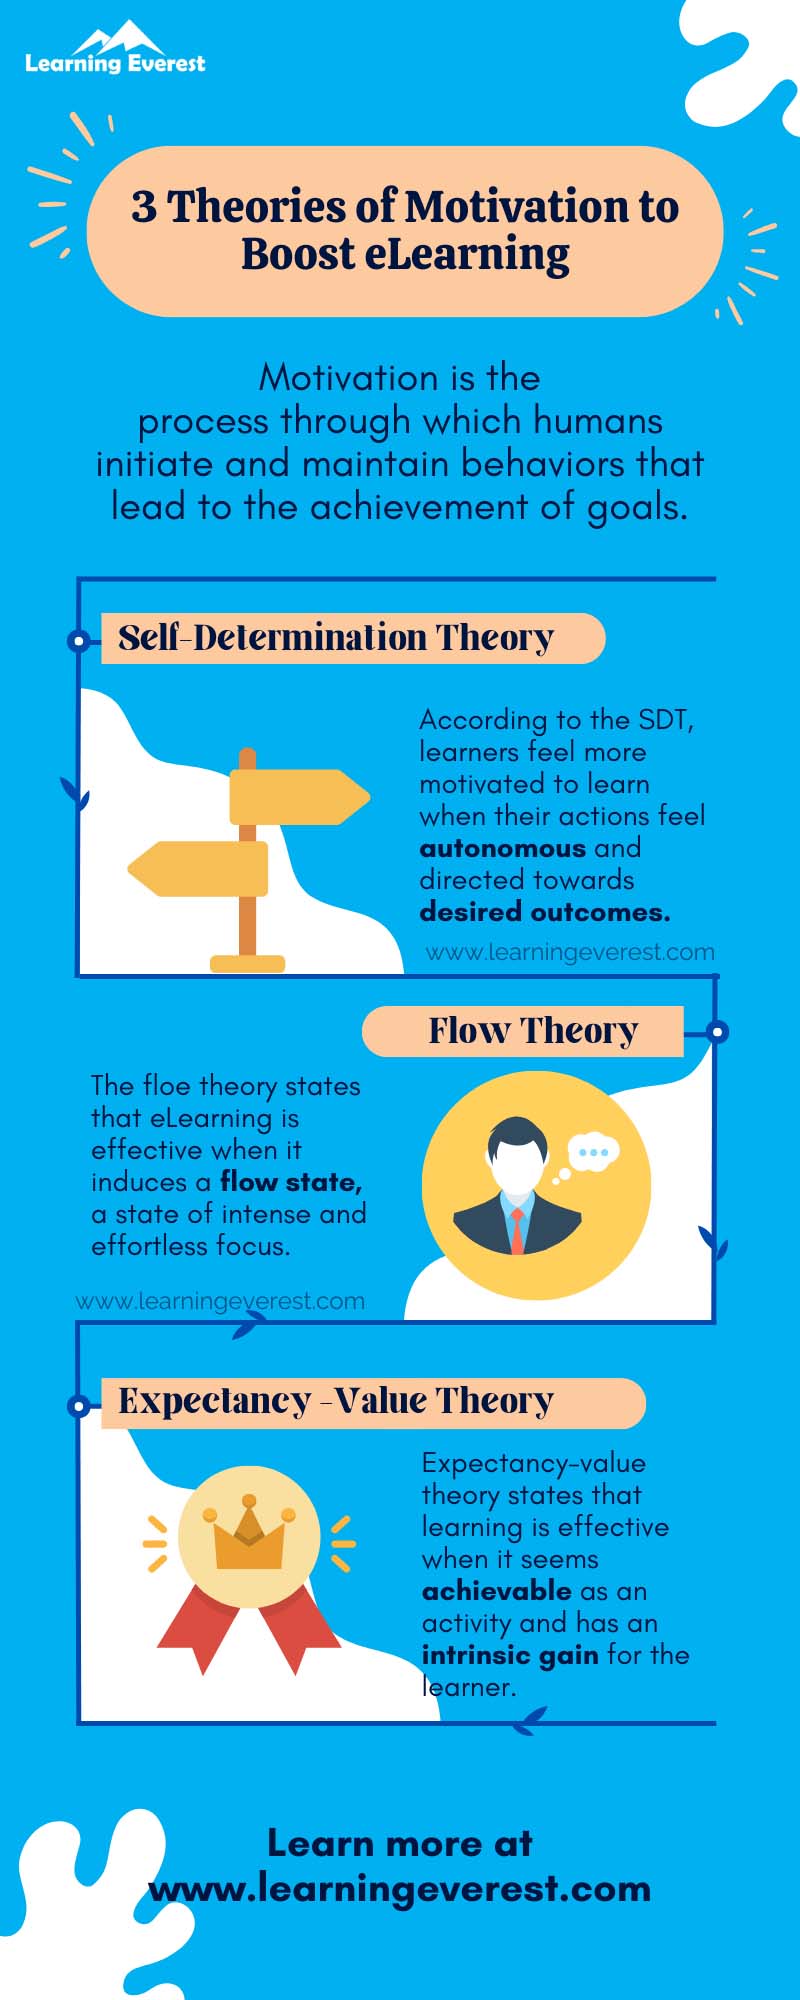 3 Theories of Motivation to Boost eLearning Courses - Infographic